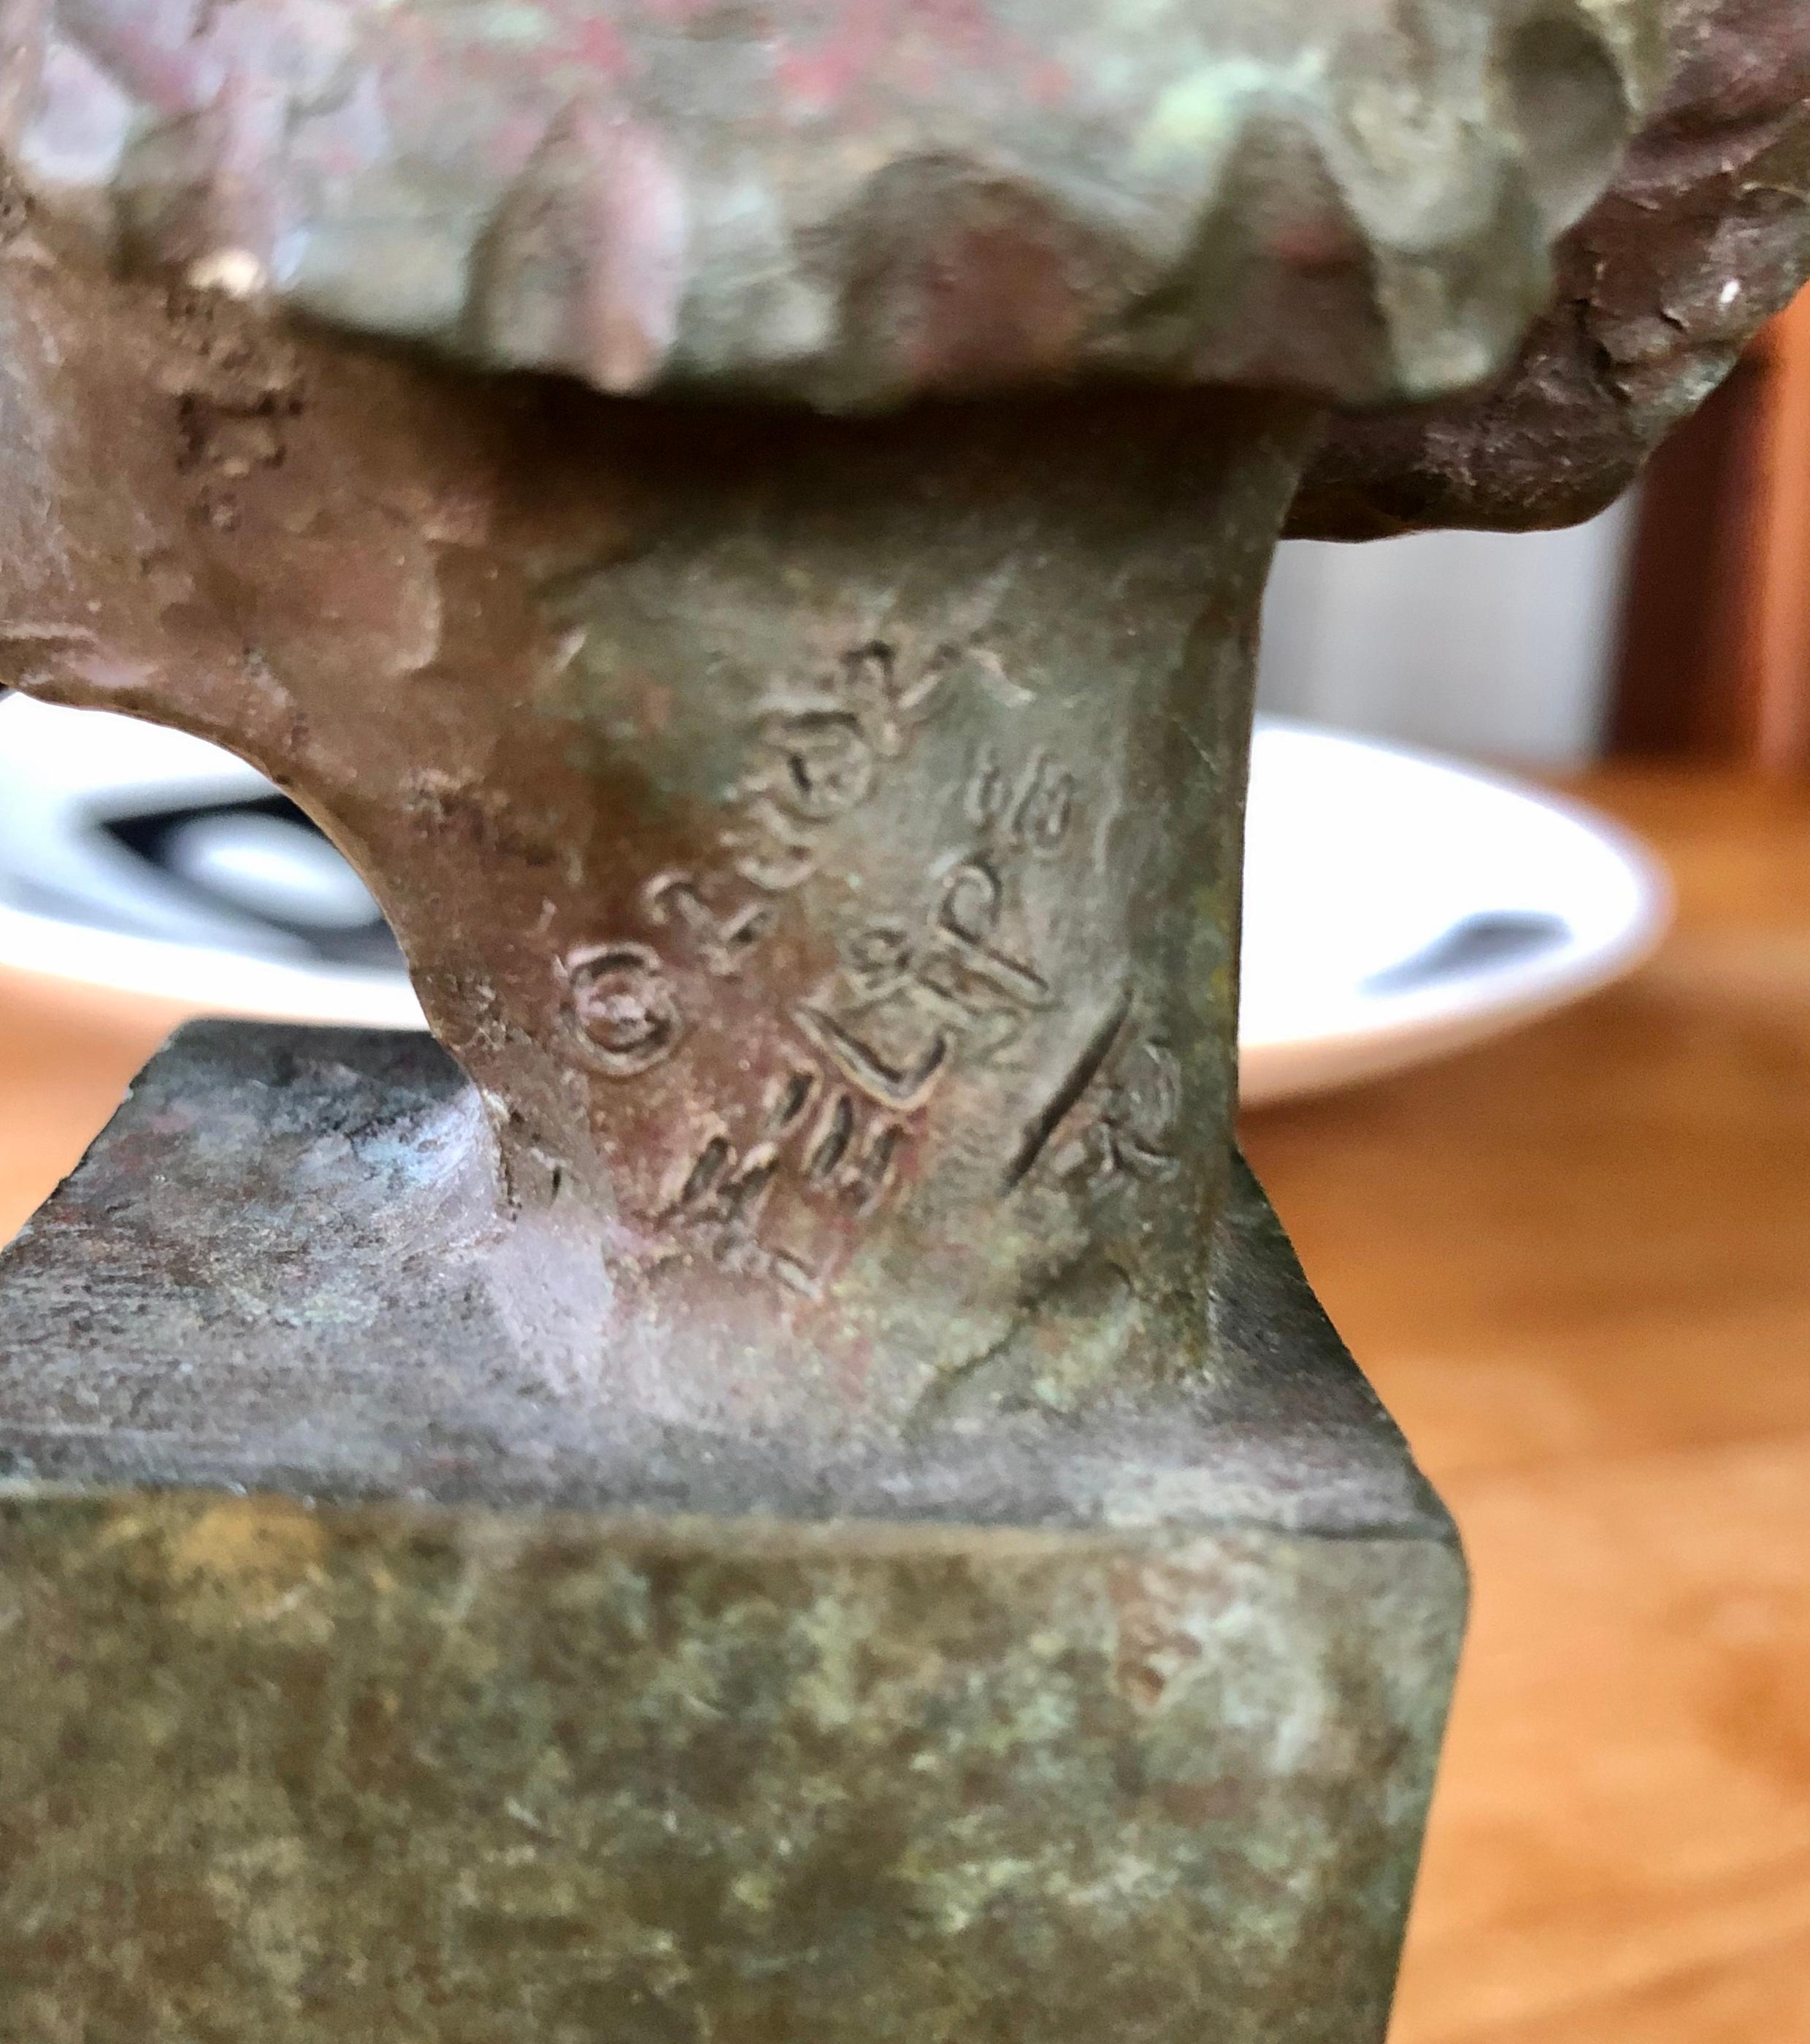 Cast bronze, indistinctly signed and numbered. Appears to be Oscar Felipe.